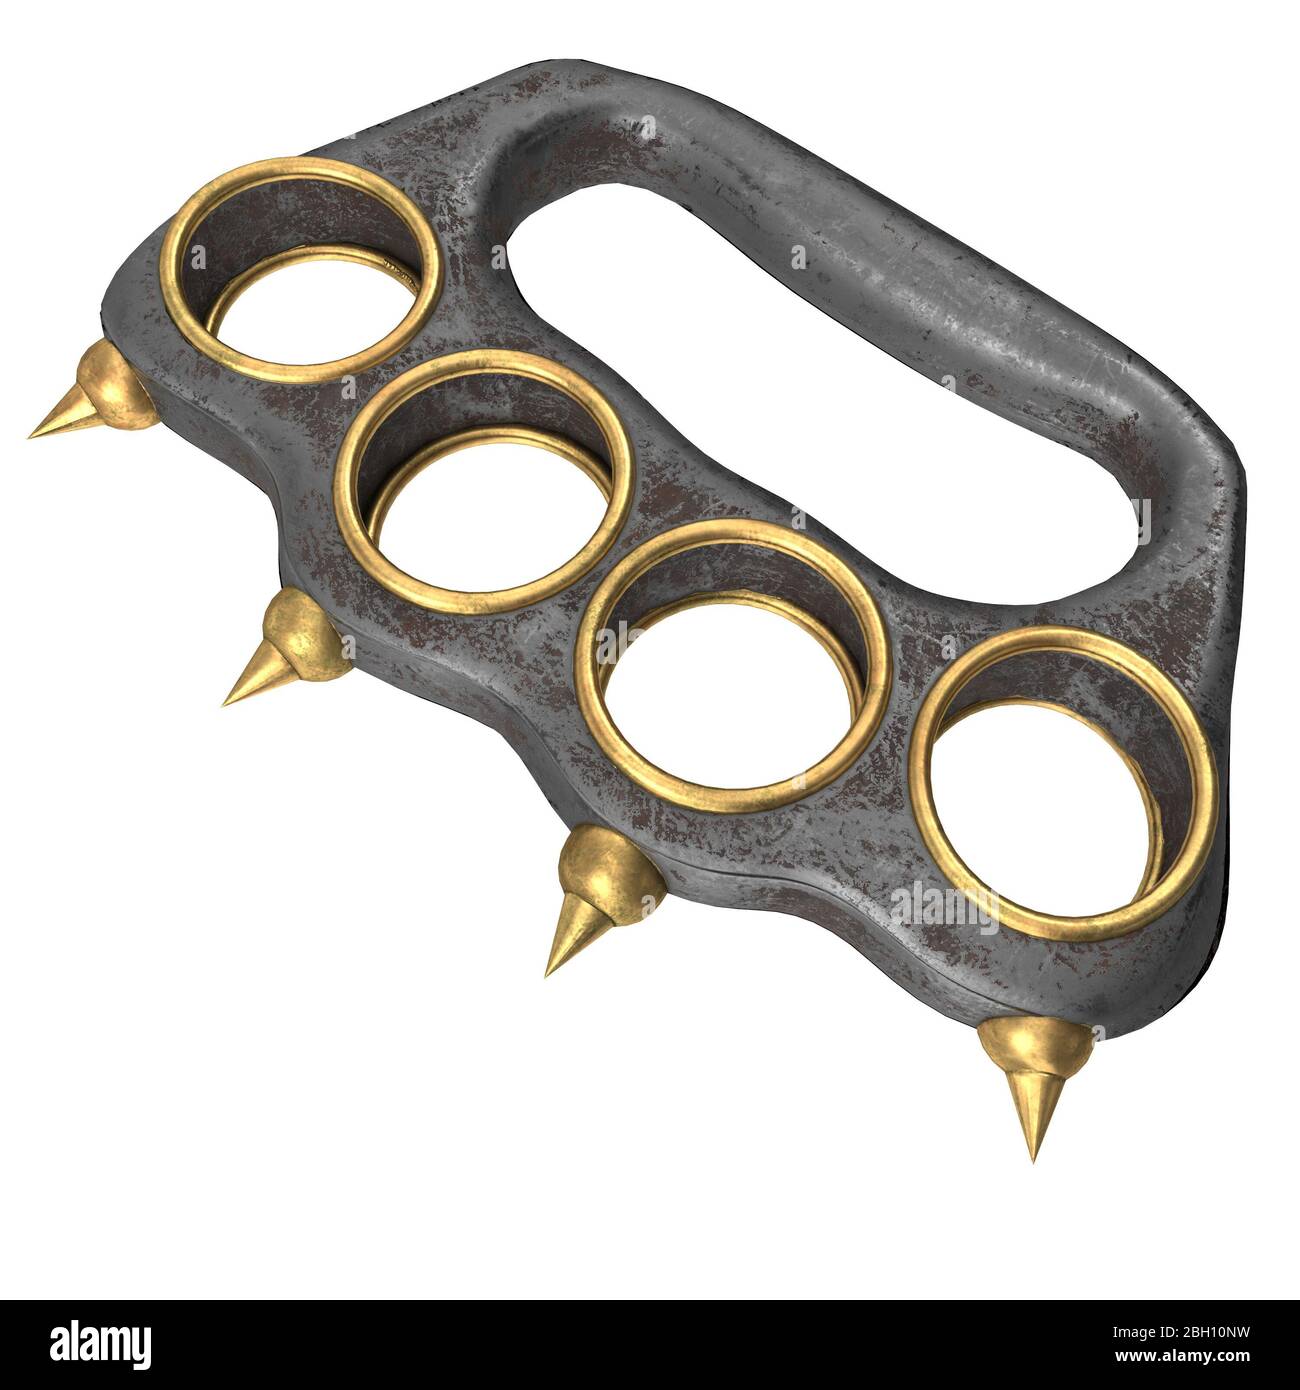 Top View Brass Knuckles On White Stock Photo 1071866615